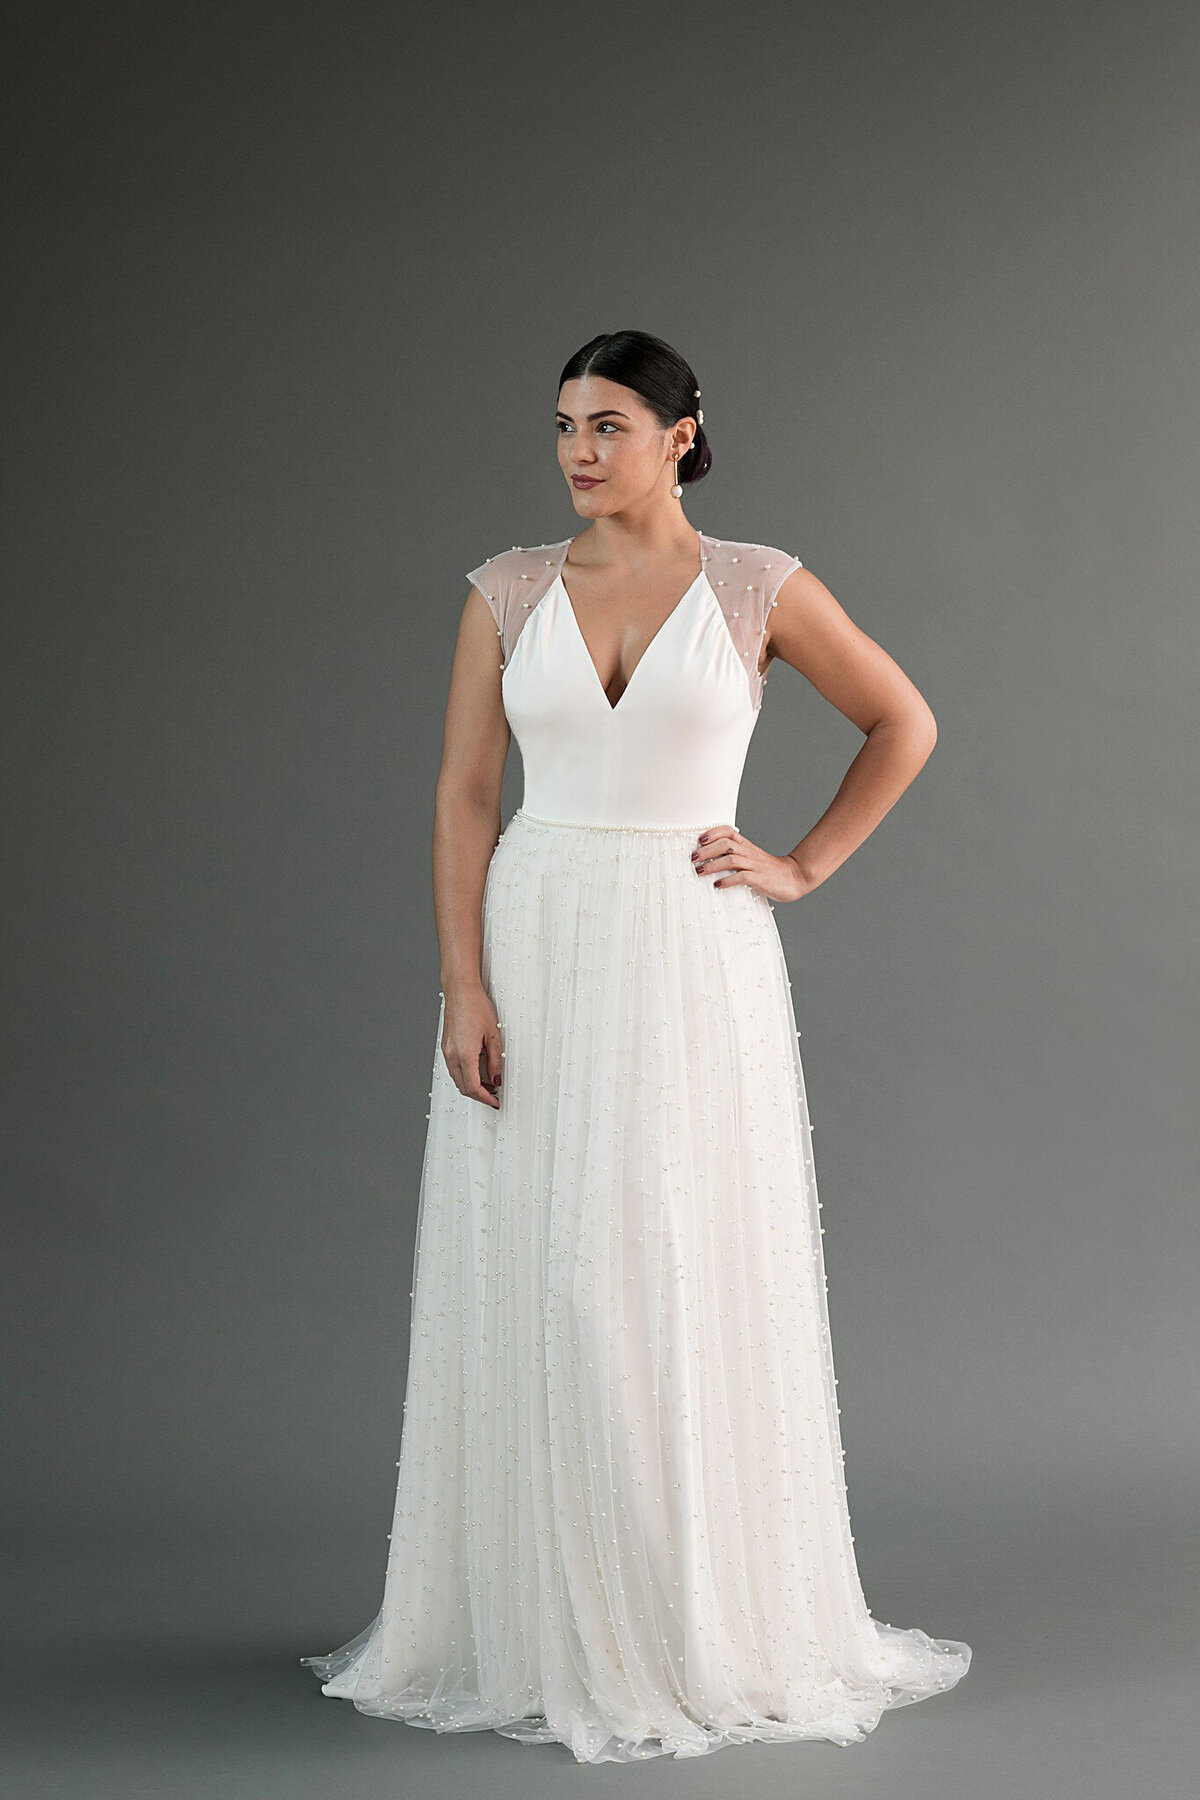 The Chika wedding dress style features a crepe v-neck top with an a-line skirt. The skirt has a gathered pearl net layer.